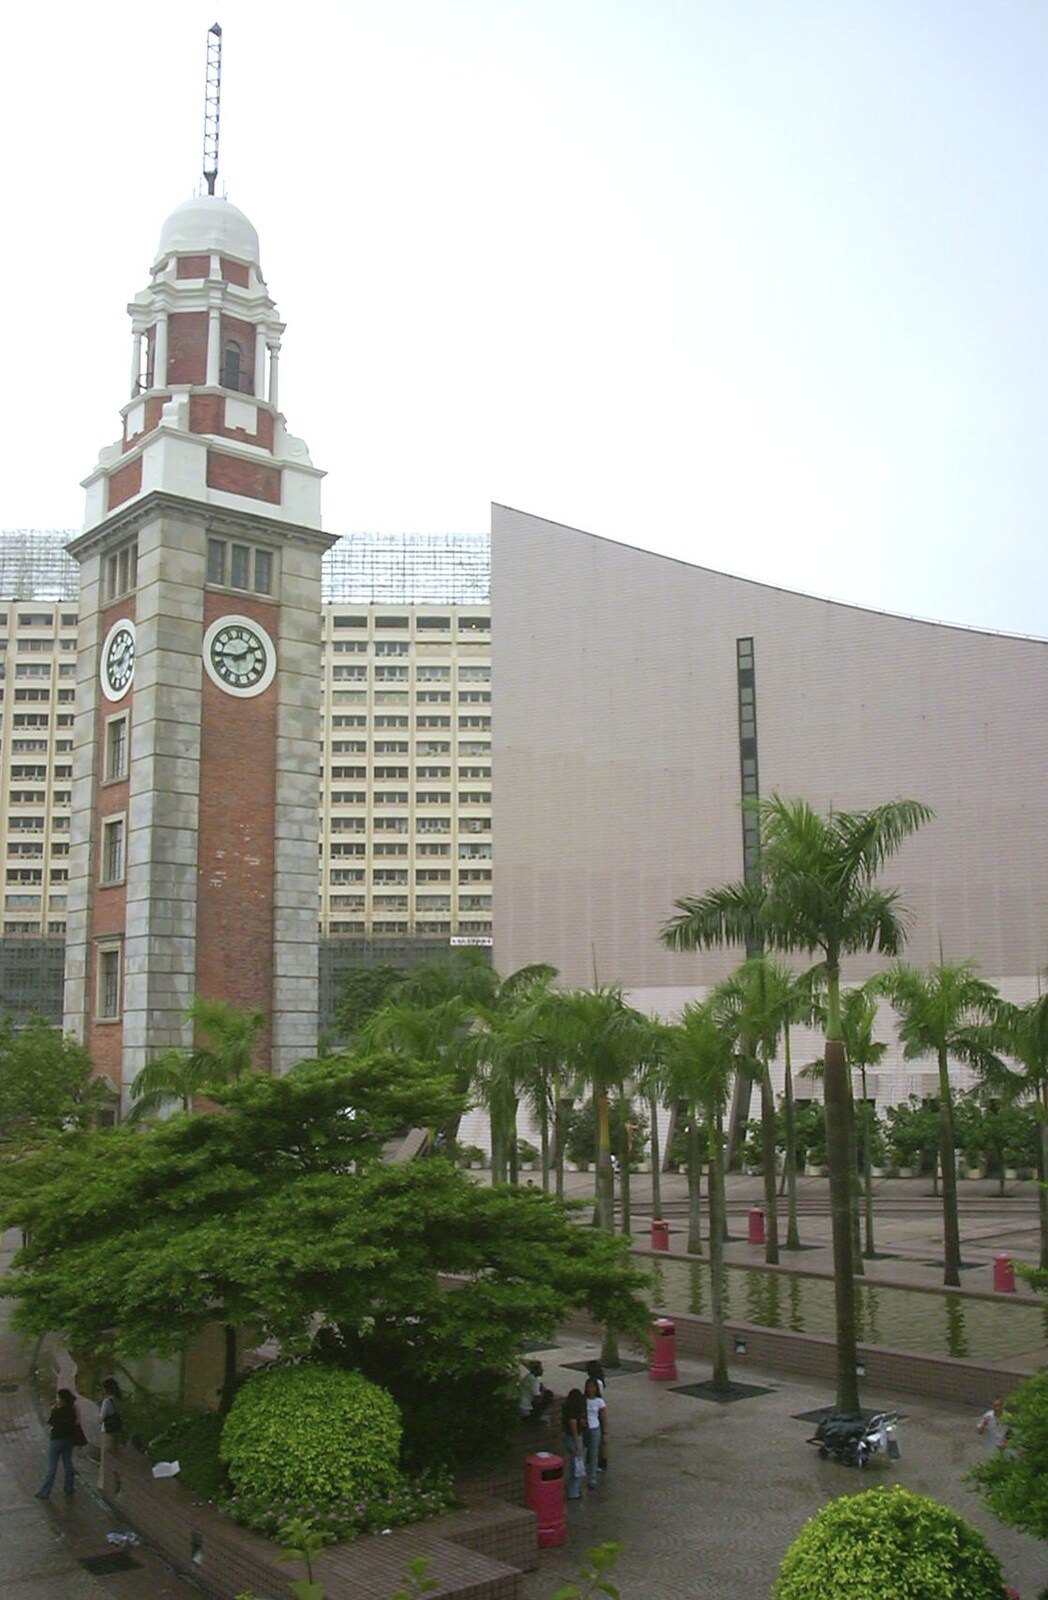 A Trip to Hong Kong, China - 11th August 2001: A clocktower in Kowloon